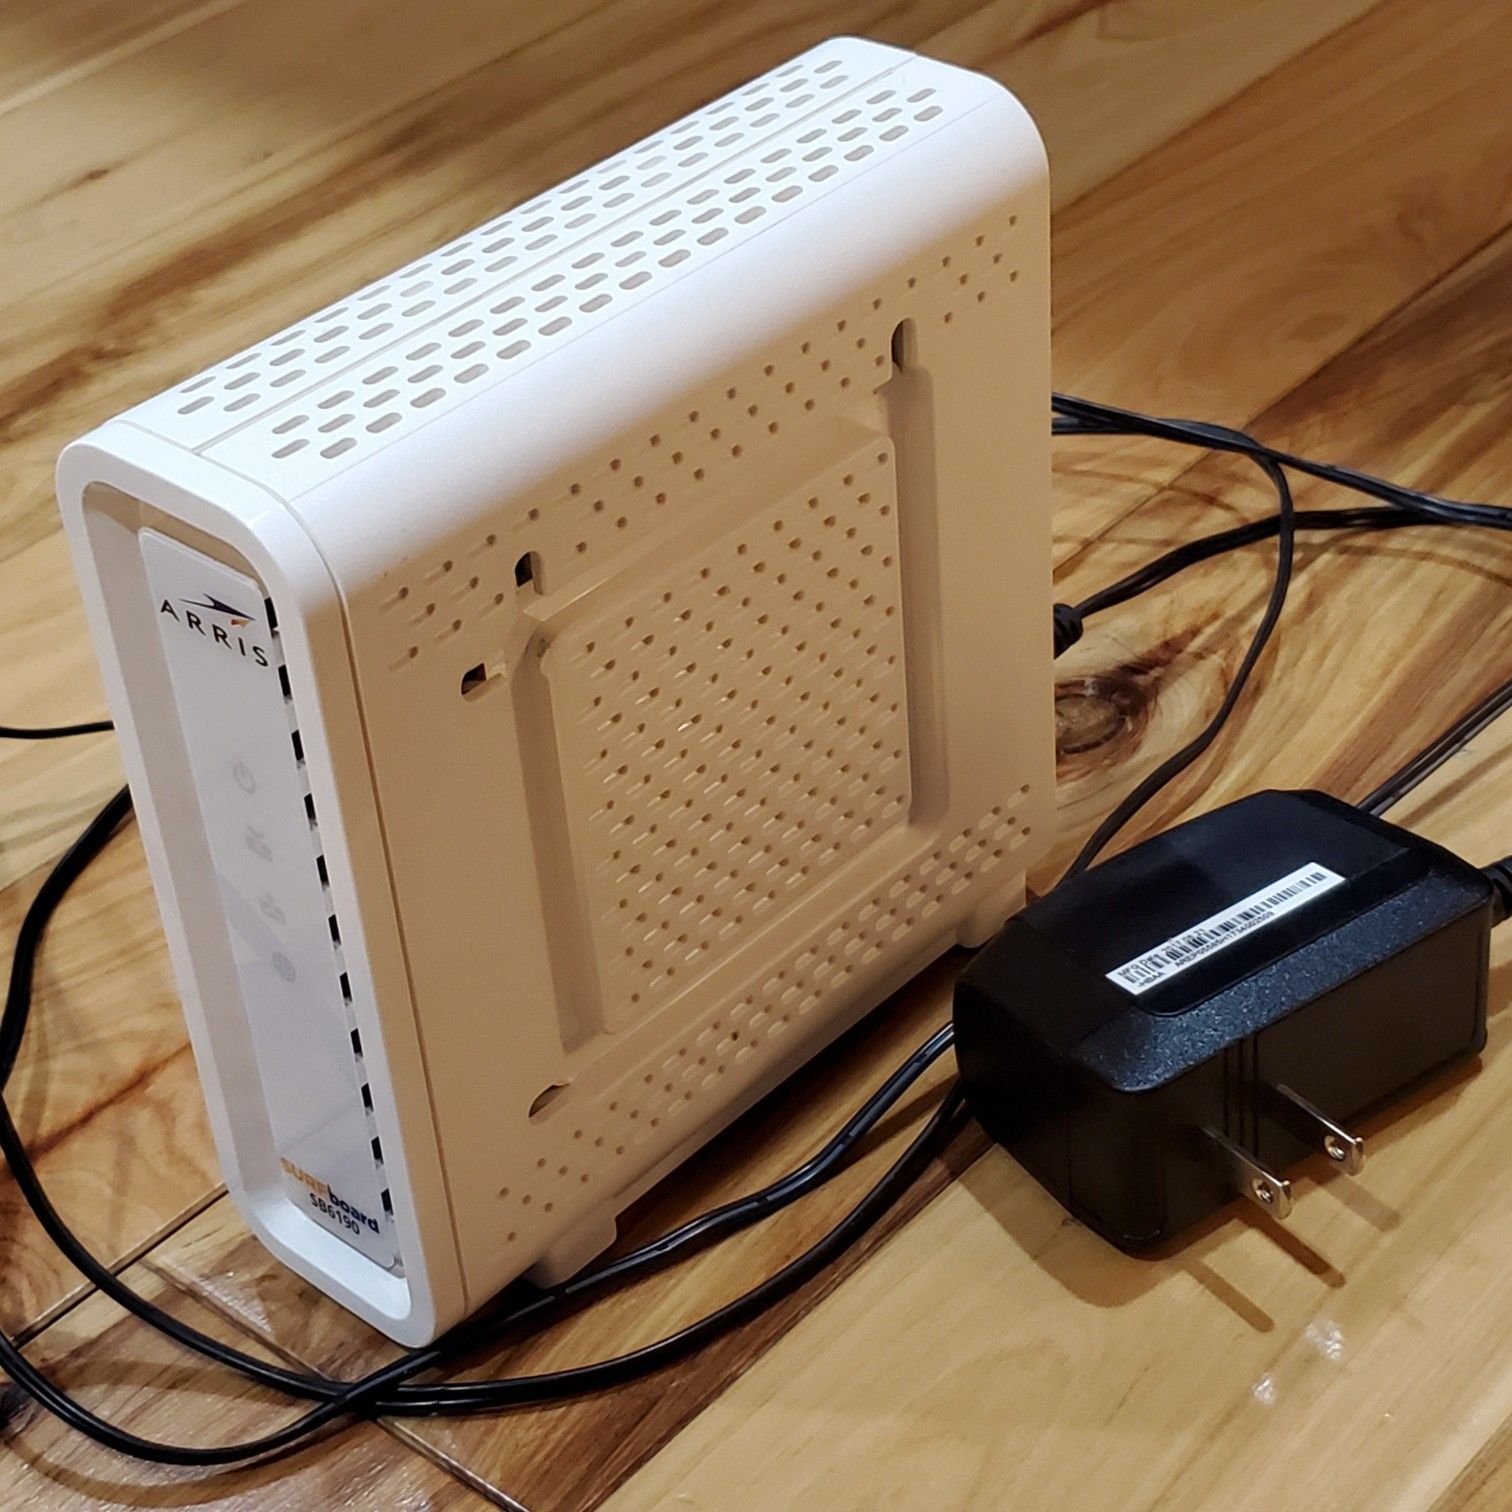 Cable Modem for FAST internet! (1.4Gbps ethernet port) Great condition!